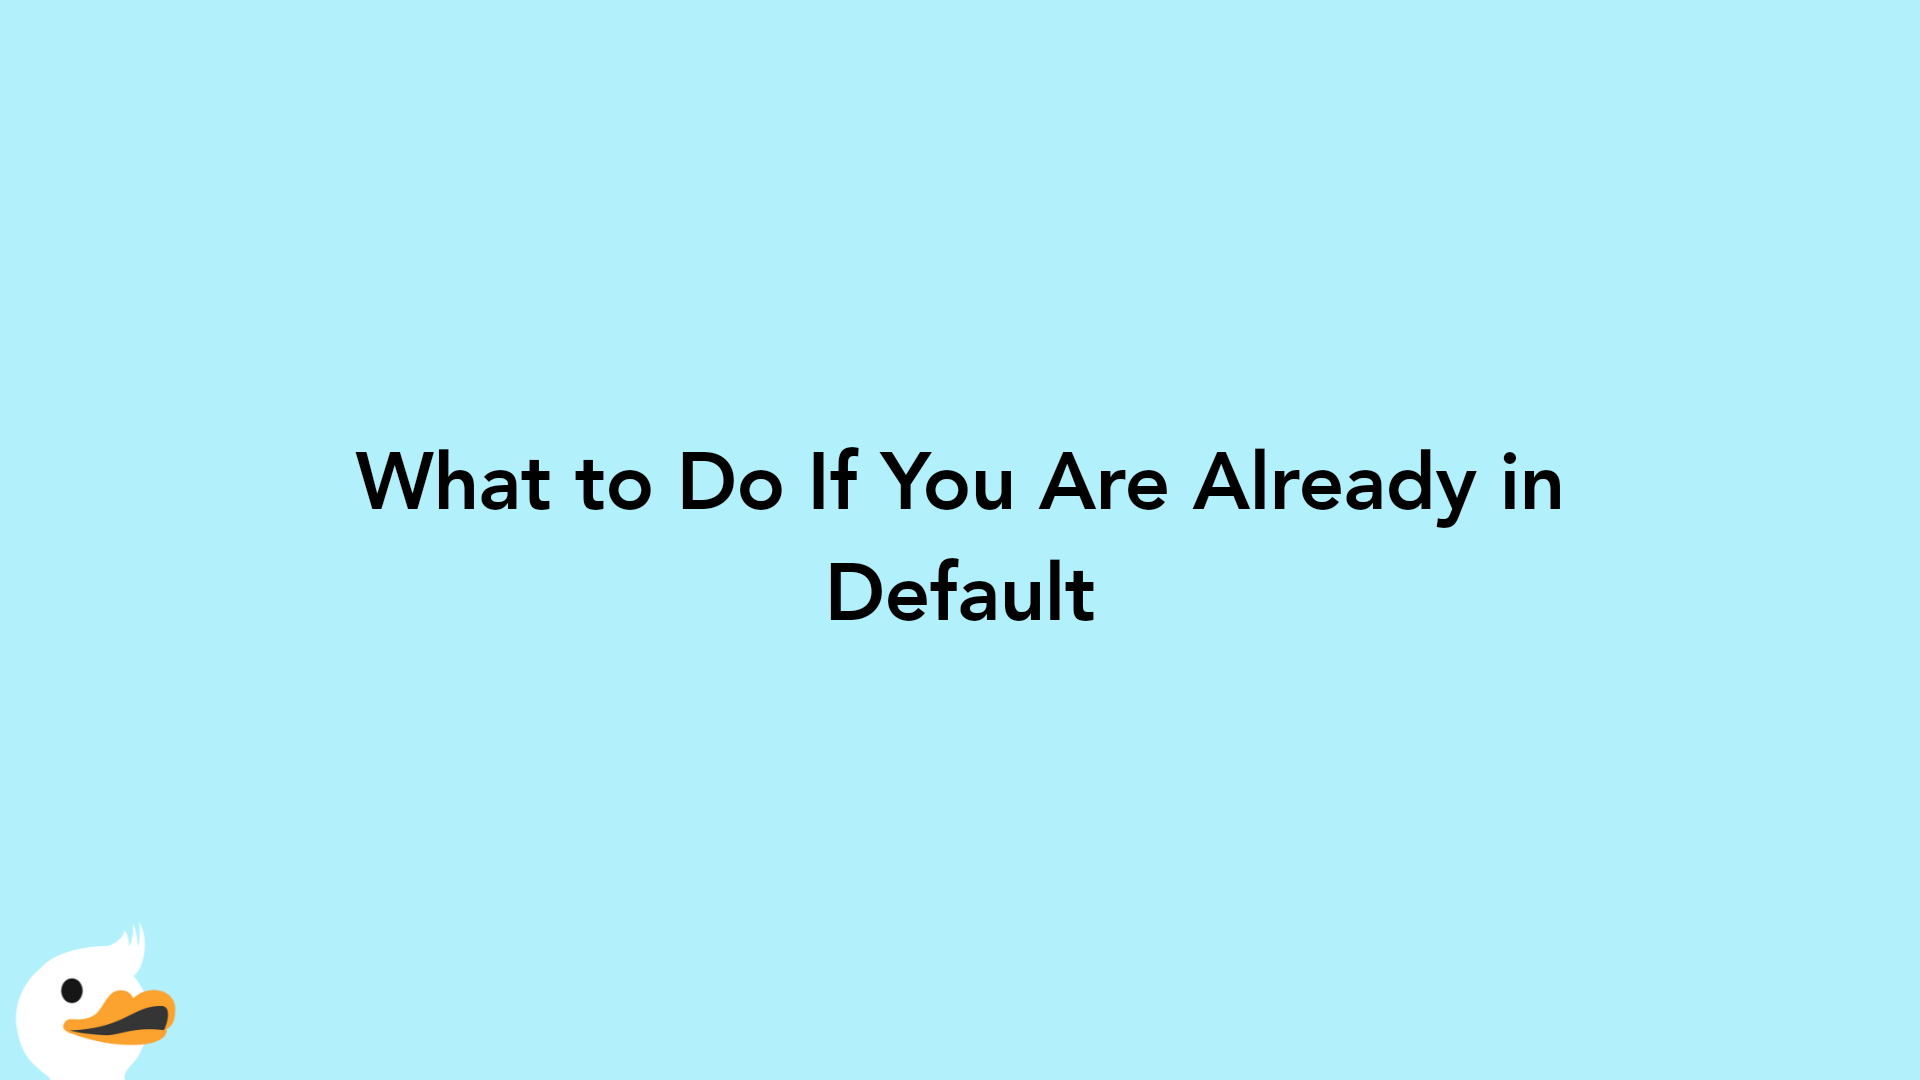 What to Do If You Are Already in Default